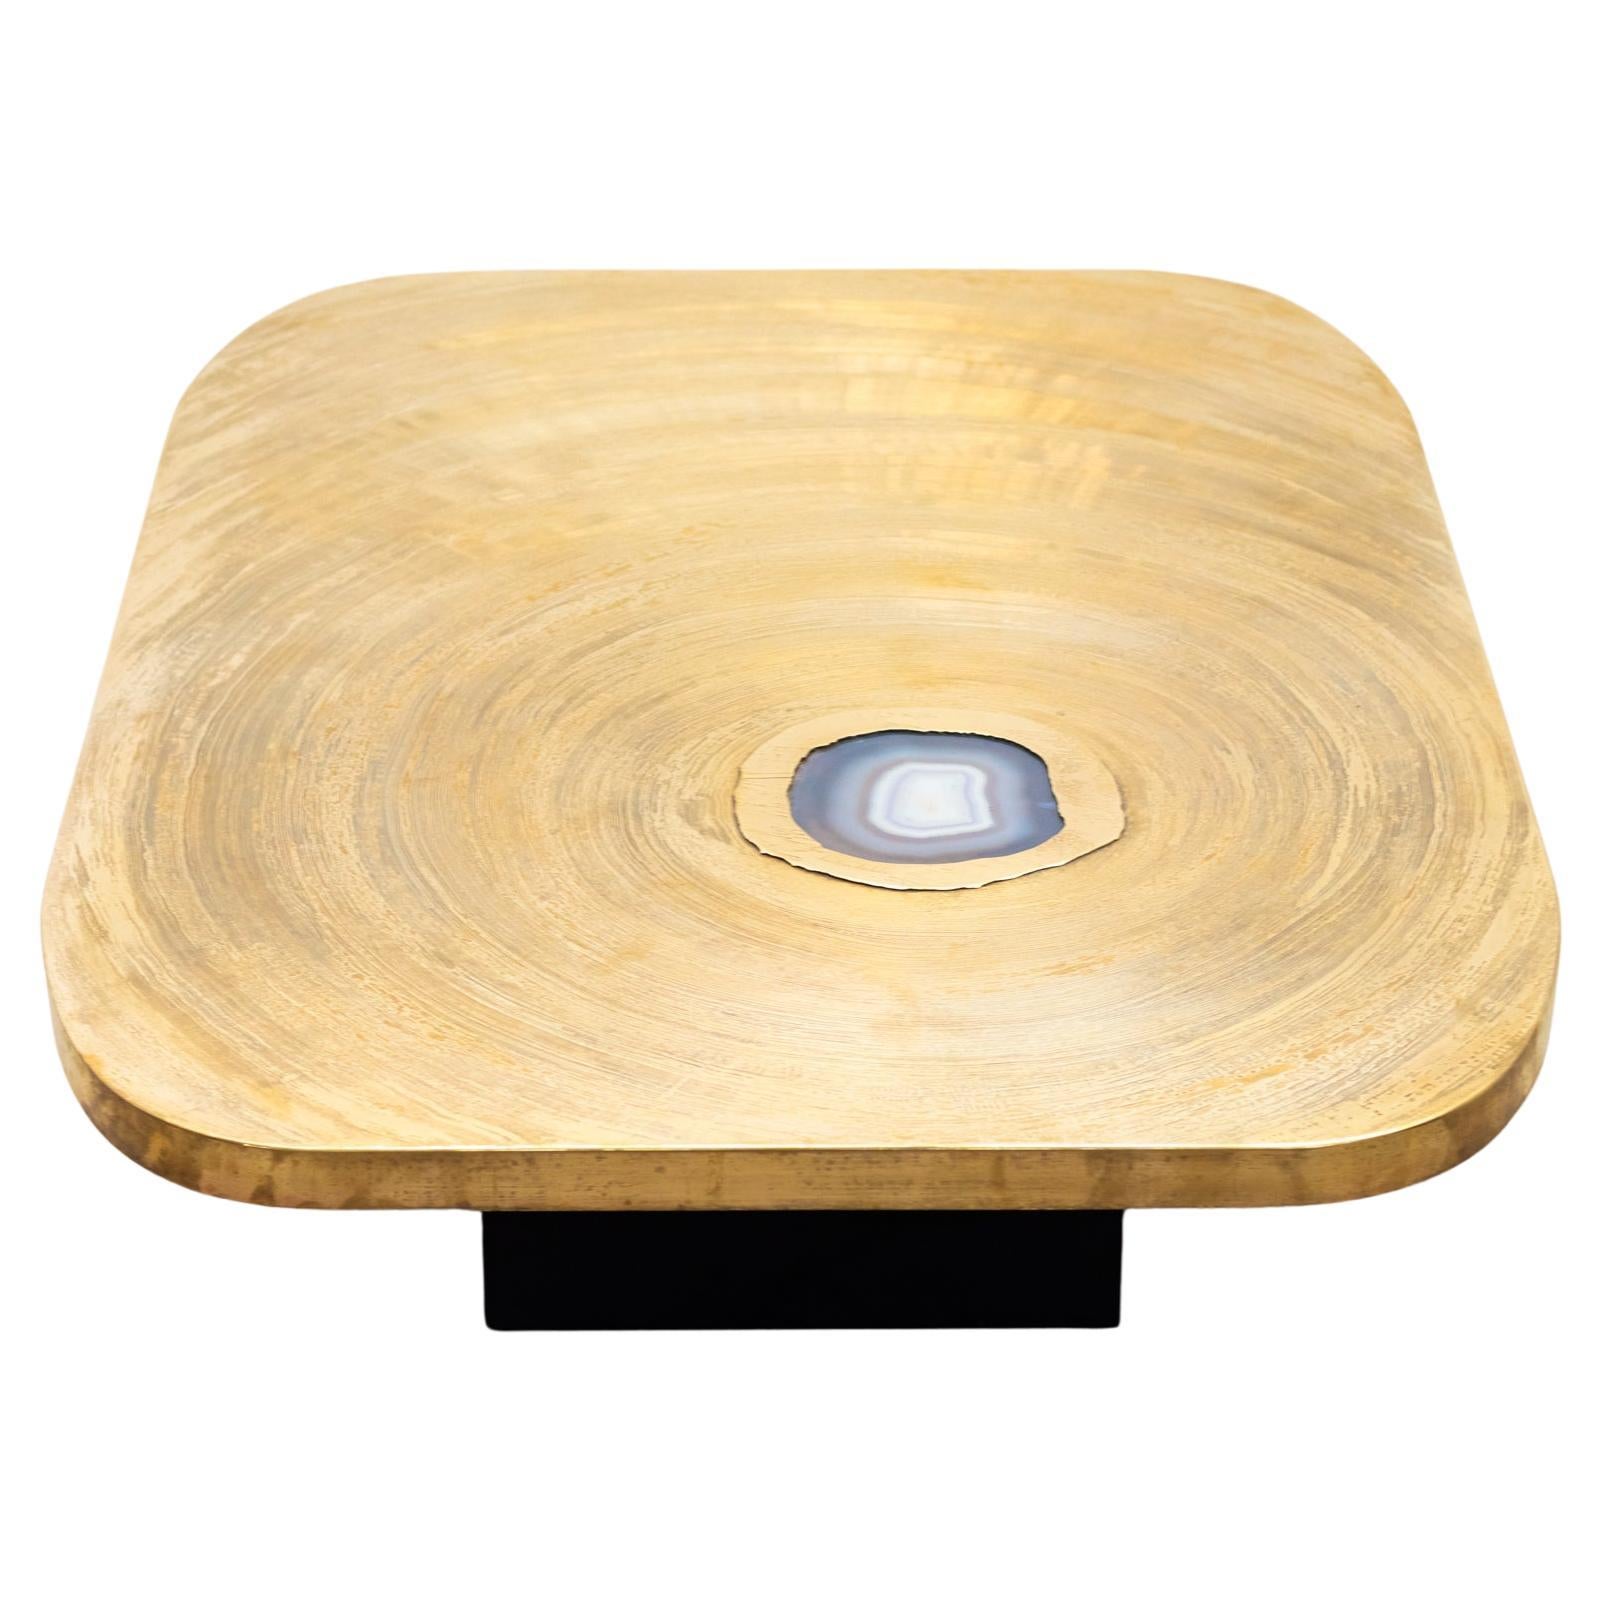 Impressive Coffee table from the 1980s signed by Christian Krekels.
Crafted from brass and features the incorporation of gemstone as decorative elements, here we have an beautiful agate. 
The brass top is beautifully engraved with a pattern that